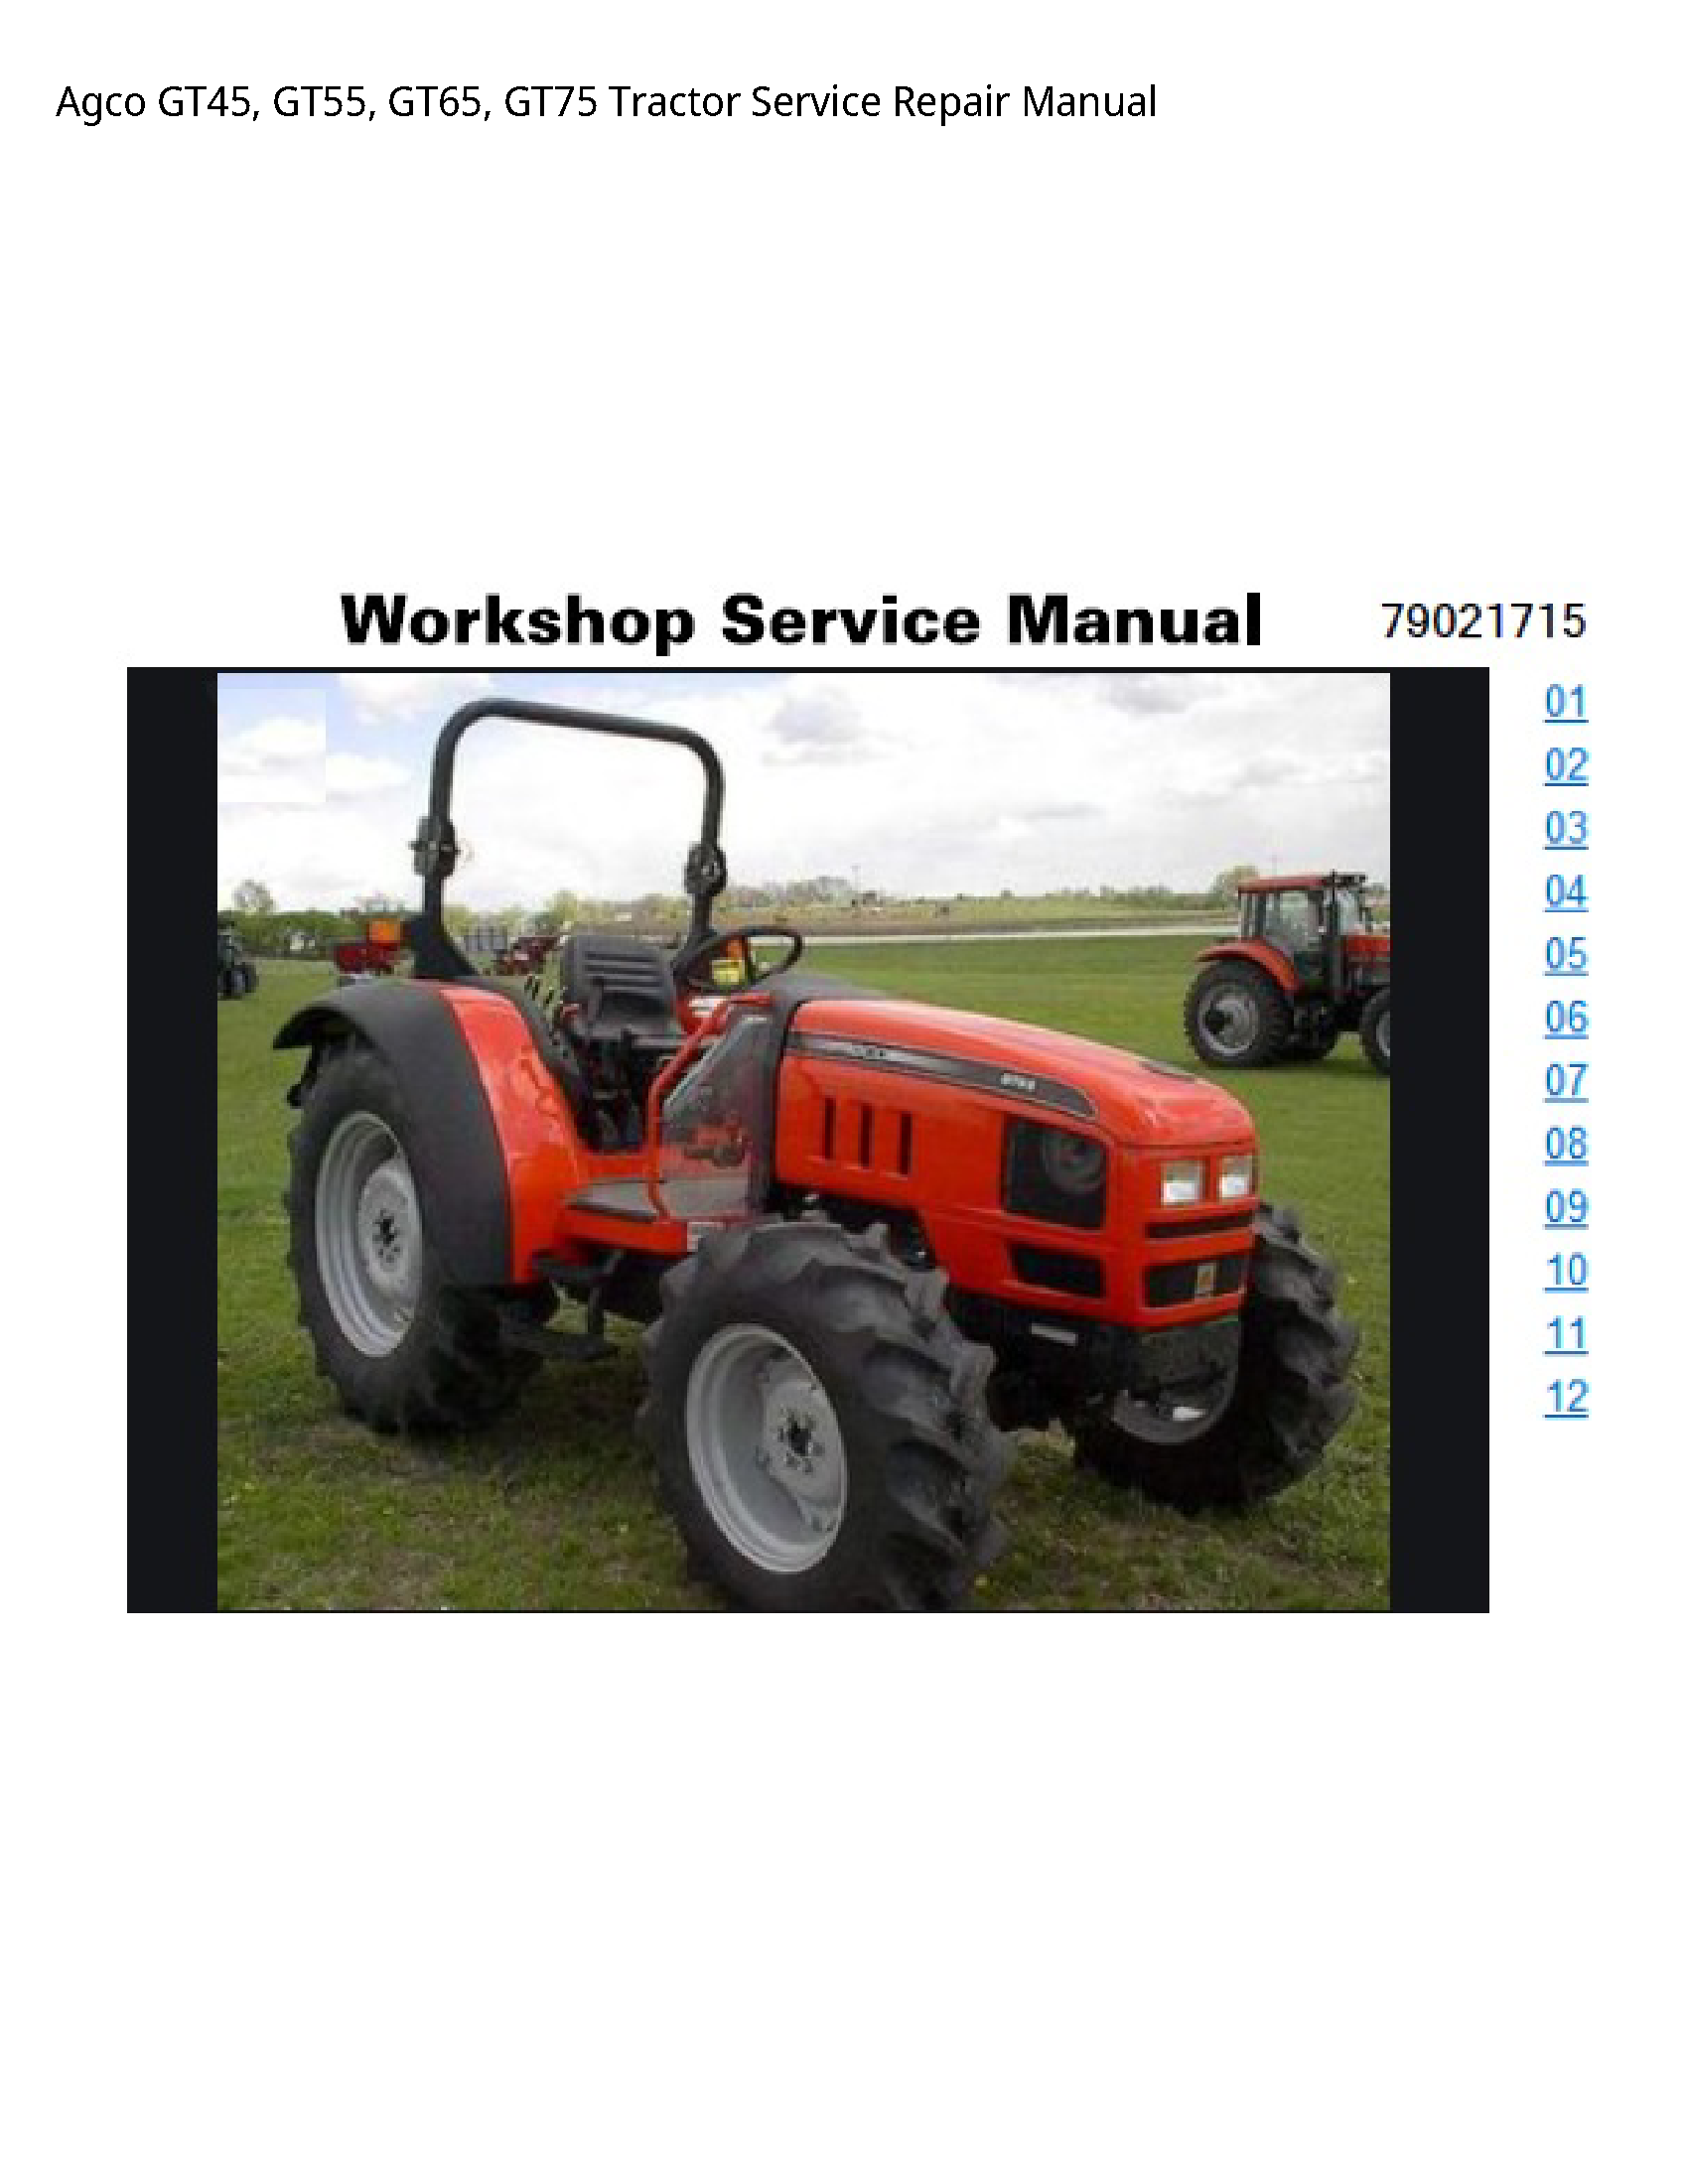 AGCO GT45 Tractor manual